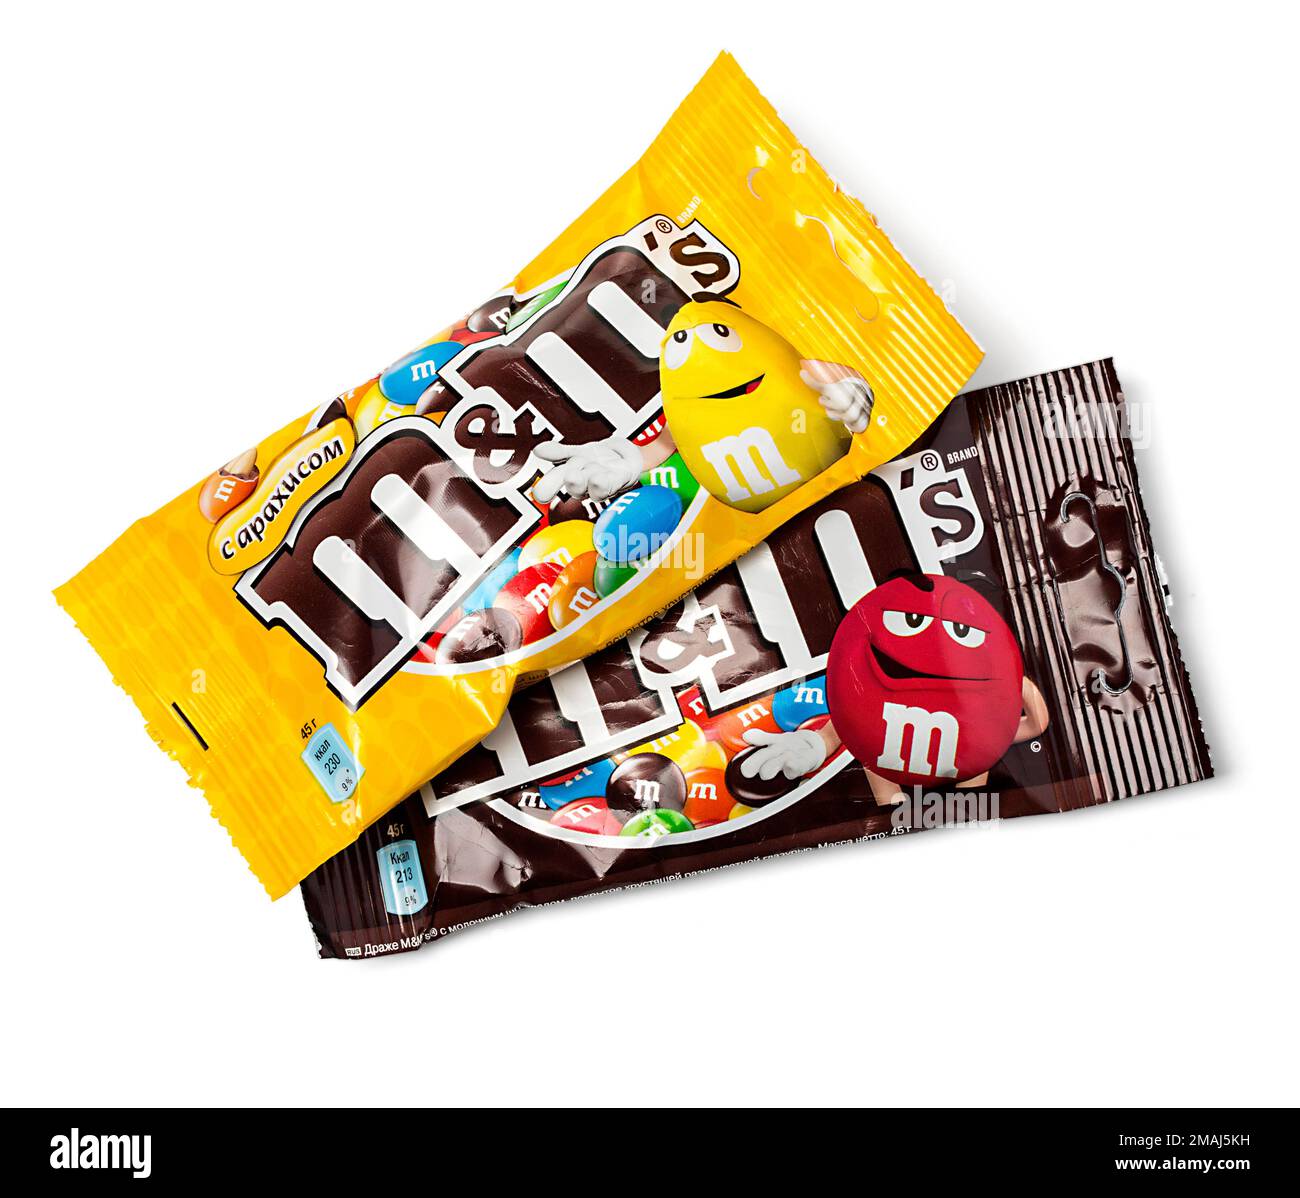 121 M&m's Chocolate Bar Images, Stock Photos, 3D objects, & Vectors